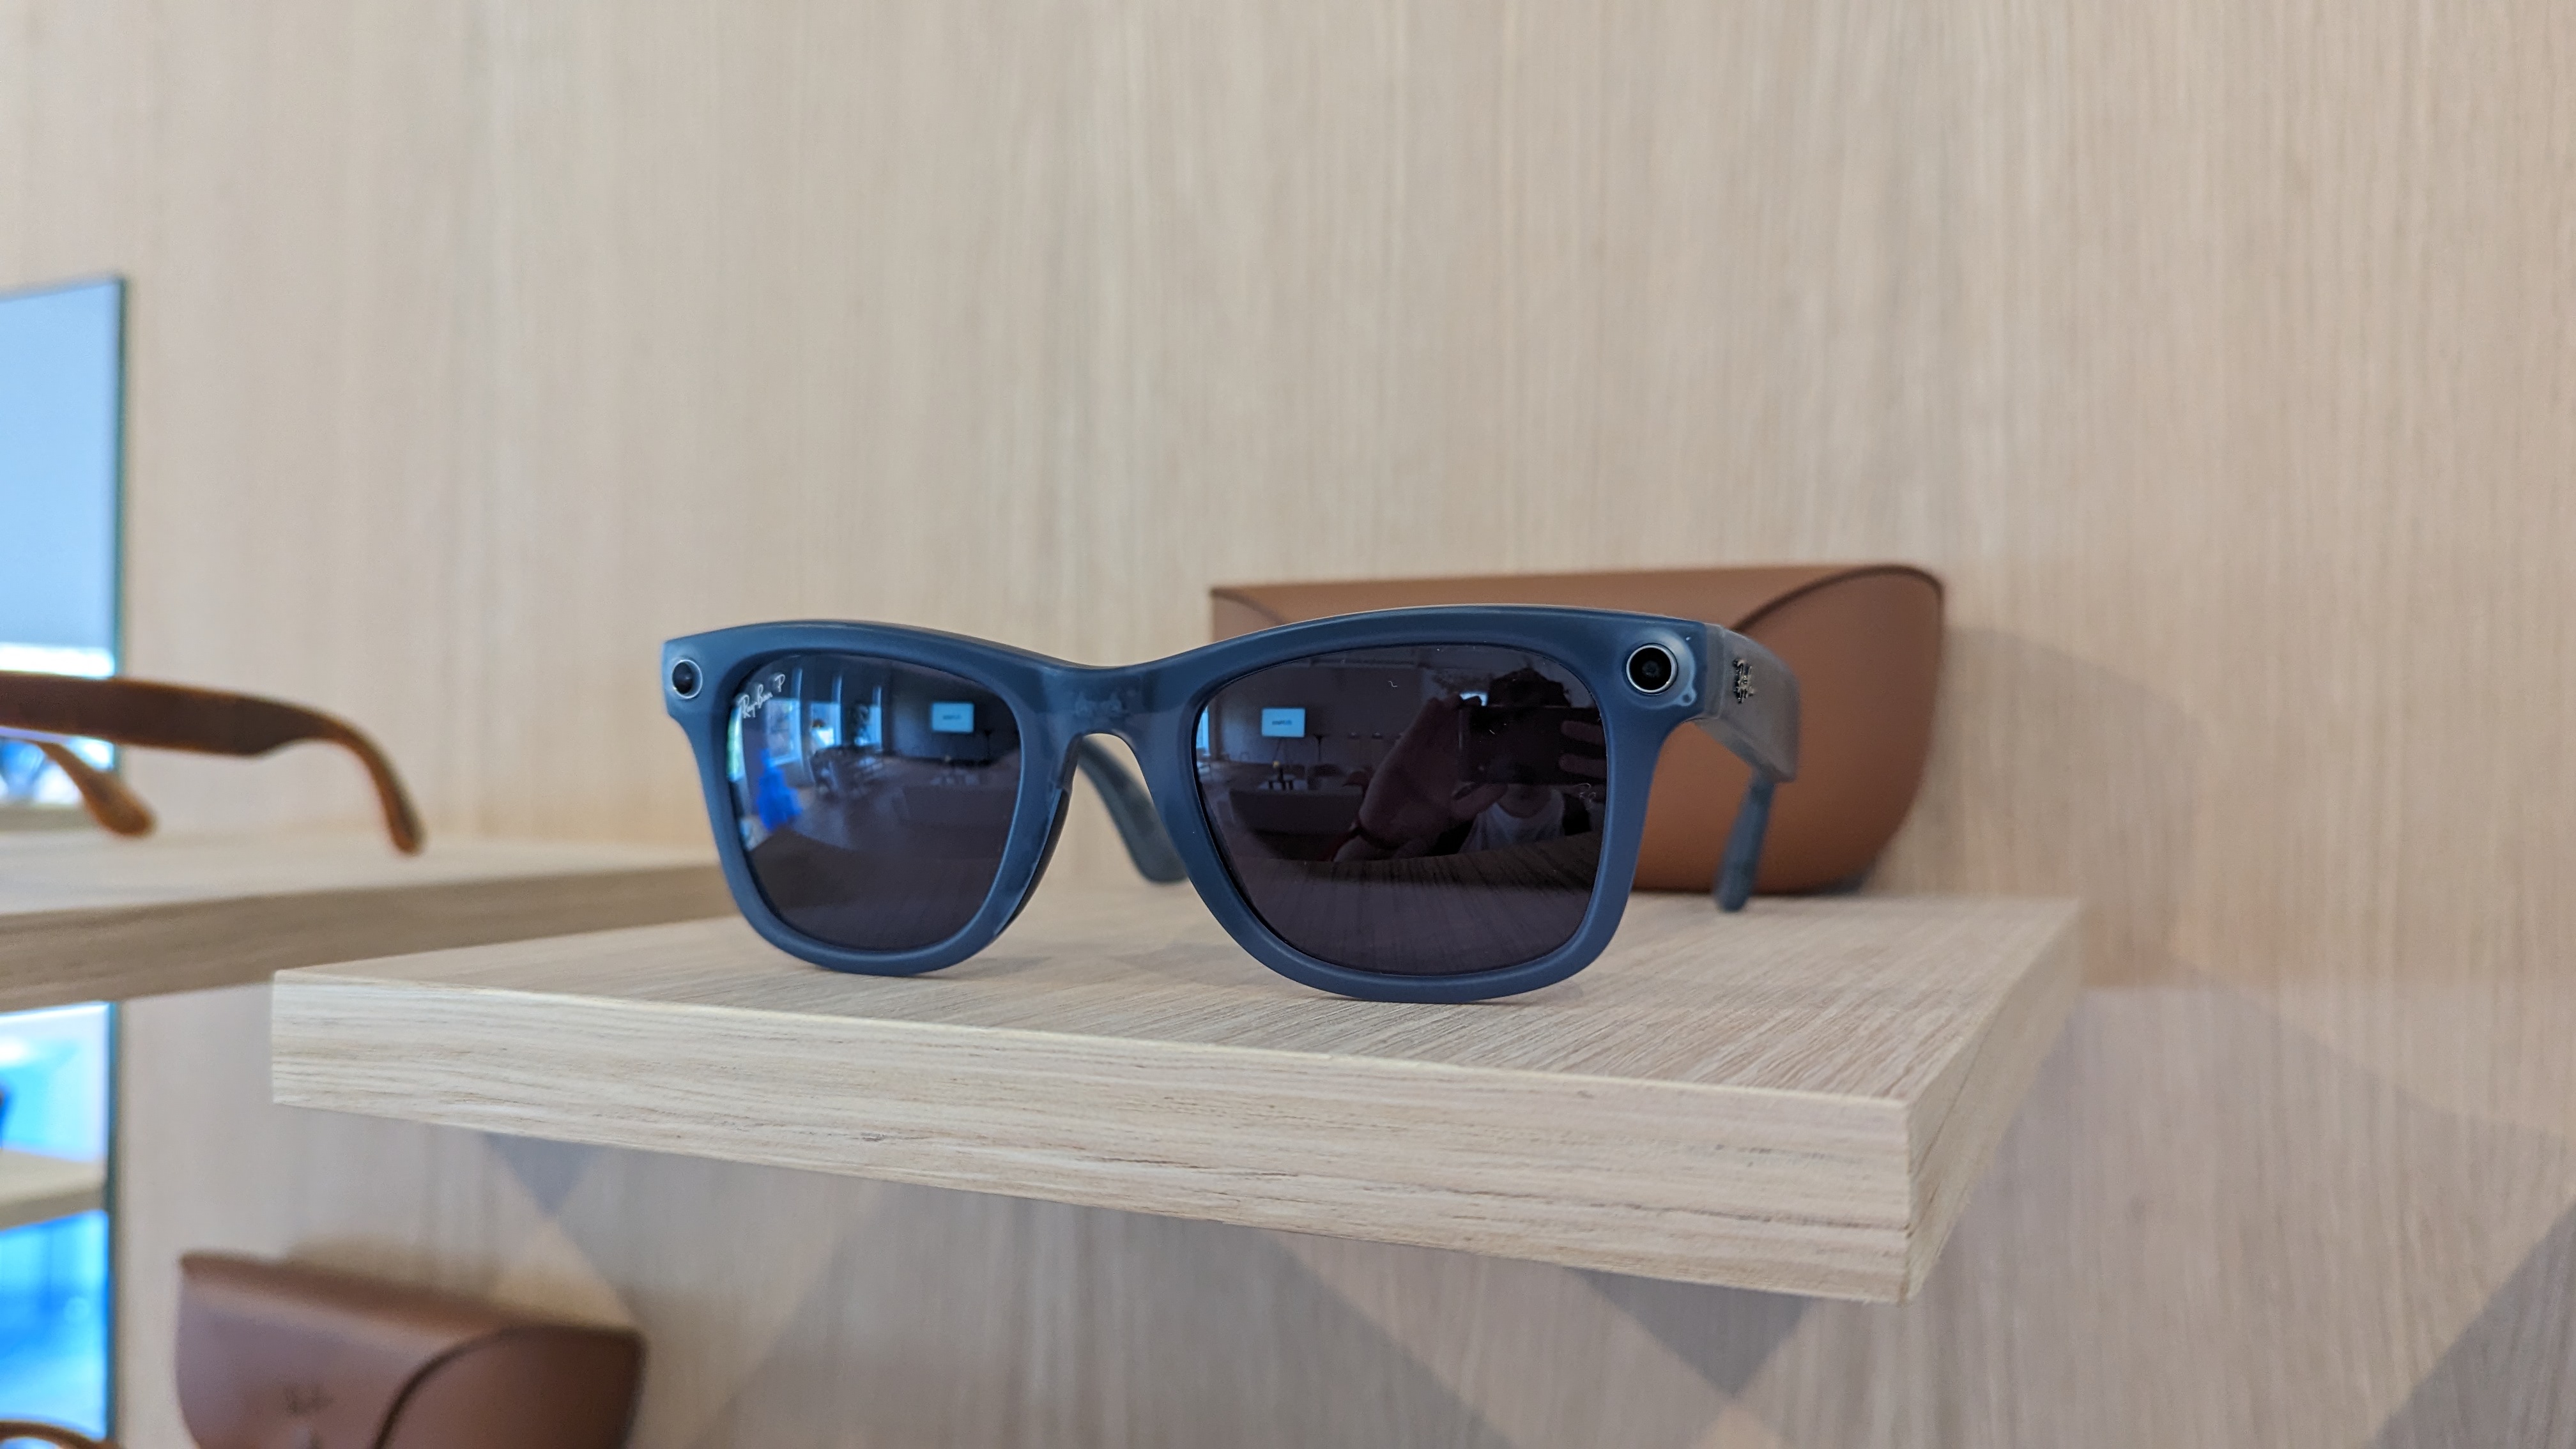 A blue Wayfarer pair of the Ray-Ban Meta Smart Glasses Collection on a wooden table in front of their charging case